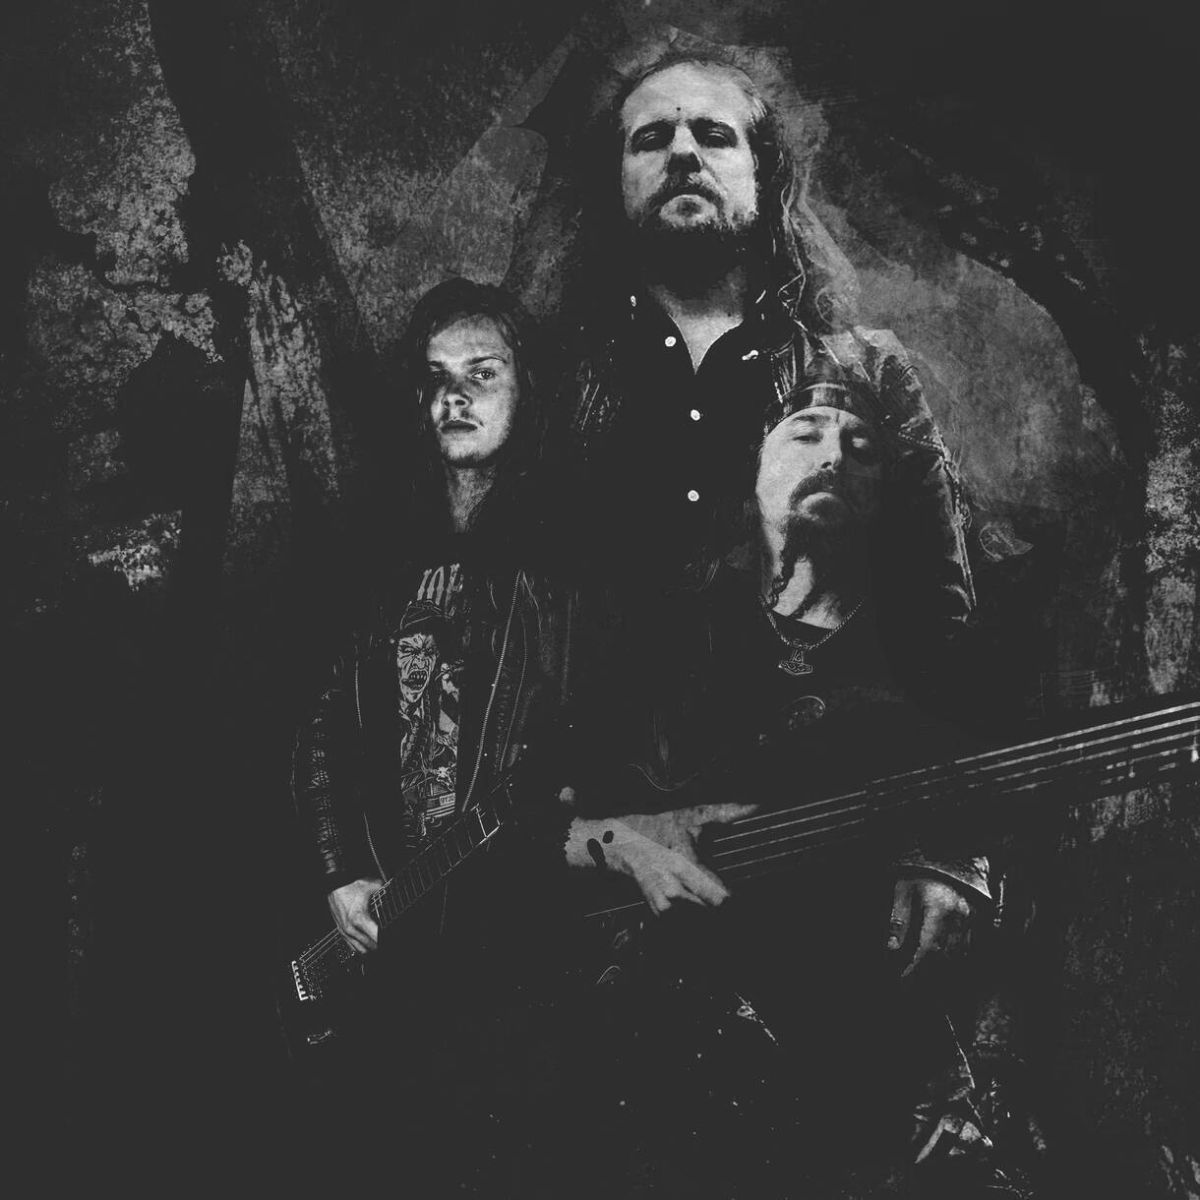 MOTHER OF ALL – Feat. TESTAMENT Bassist STEVE DI GIORGIO – Release First Single + Lyric Video ‘Autumn’ From Debut Album!